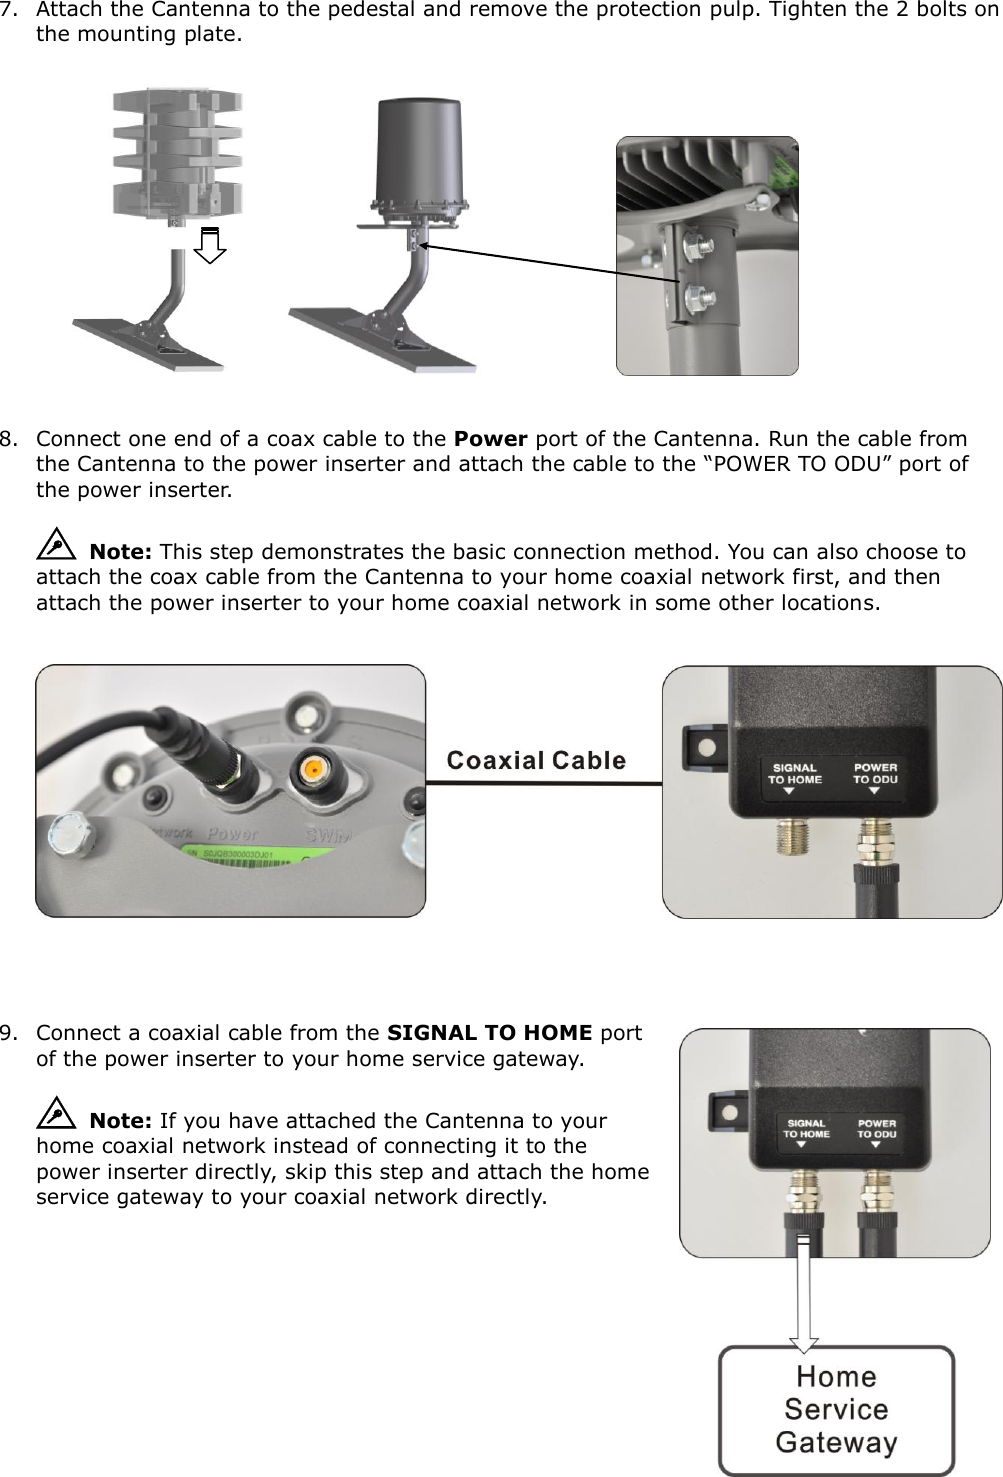 7. Attach the Cantenna to the pedestal and remove the protection pulp. Tighten the 2 bolts on the mounting plate.                            8. Connect one end of a coax cable to the Power port of the Cantenna. Run the cable from the Cantenna to the power inserter and attach the cable to the “POWER TO ODU” port of the power inserter.   Note: This step demonstrates the basic connection method. You can also choose to attach the coax cable from the Cantenna to your home coaxial network first, and then attach the power inserter to your home coaxial network in some other locations.            9. Connect a coaxial cable from the SIGNAL TO HOME port of the power inserter to your home service gateway.   Note: If you have attached the Cantenna to your home coaxial network instead of connecting it to the power inserter directly, skip this step and attach the home service gateway to your coaxial network directly.          